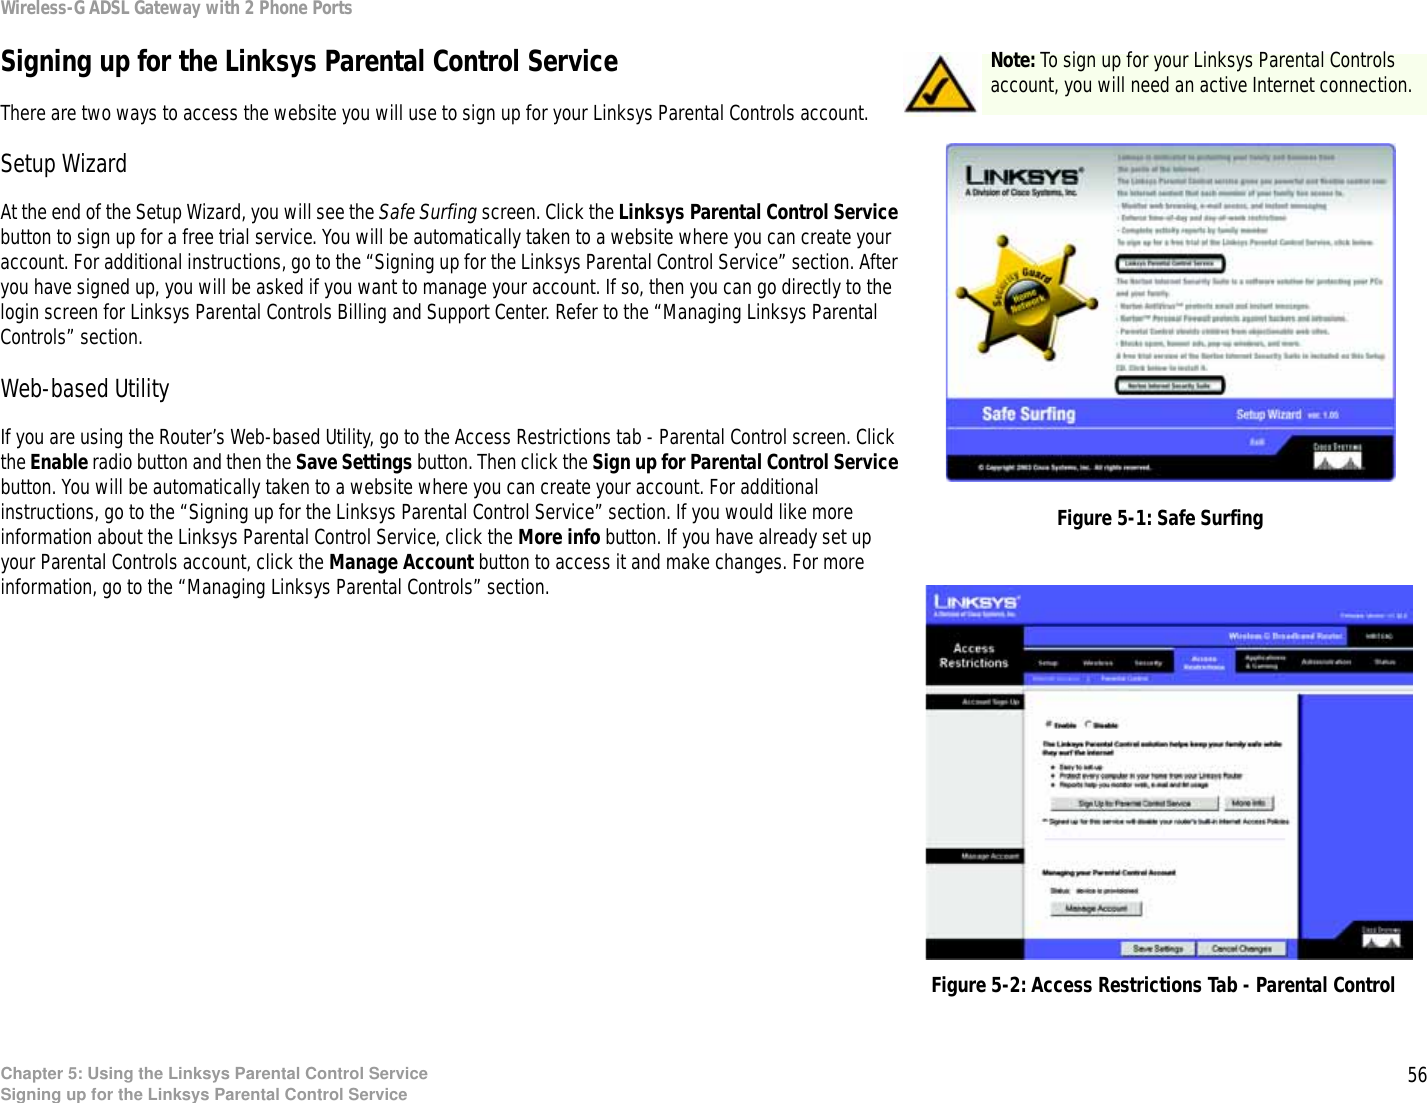 56Chapter 5: Using the Linksys Parental Control ServiceSigning up for the Linksys Parental Control ServiceWireless-G ADSL Gateway with 2 Phone PortsSigning up for the Linksys Parental Control ServiceThere are two ways to access the website you will use to sign up for your Linksys Parental Controls account.Setup WizardAt the end of the Setup Wizard, you will see the Safe Surfing screen. Click the Linksys Parental Control Service button to sign up for a free trial service. You will be automatically taken to a website where you can create your account. For additional instructions, go to the “Signing up for the Linksys Parental Control Service” section. After you have signed up, you will be asked if you want to manage your account. If so, then you can go directly to the login screen for Linksys Parental Controls Billing and Support Center. Refer to the “Managing Linksys Parental Controls” section.Web-based UtilityIf you are using the Router’s Web-based Utility, go to the Access Restrictions tab - Parental Control screen. Click the Enable radio button and then the Save Settings button. Then click the Sign up for Parental Control Service button. You will be automatically taken to a website where you can create your account. For additional instructions, go to the “Signing up for the Linksys Parental Control Service” section. If you would like more information about the Linksys Parental Control Service, click the More info button. If you have already set up your Parental Controls account, click the Manage Account button to access it and make changes. For more information, go to the “Managing Linksys Parental Controls” section.Figure 5-2: Access Restrictions Tab - Parental ControlFigure 5-1: Safe SurfingNote: To sign up for your Linksys Parental Controls account, you will need an active Internet connection.